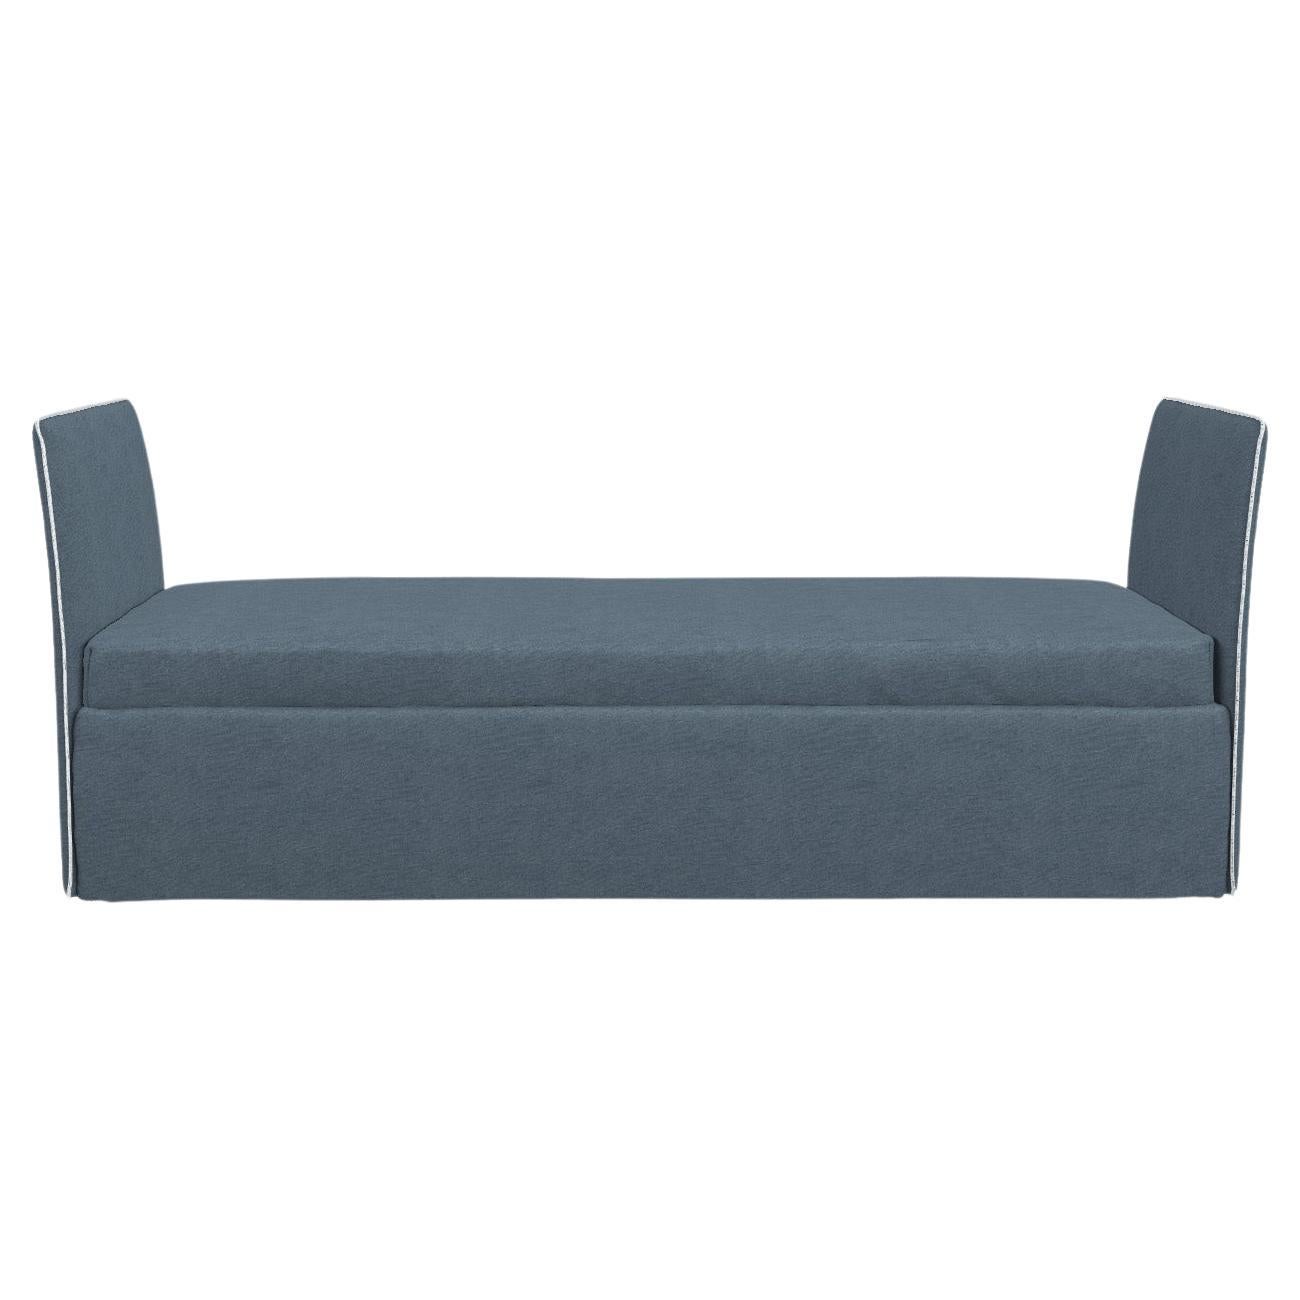 Gervasoni Open 2 Large Modular Bed Sofa in Munch Upholstery by Paola Navone